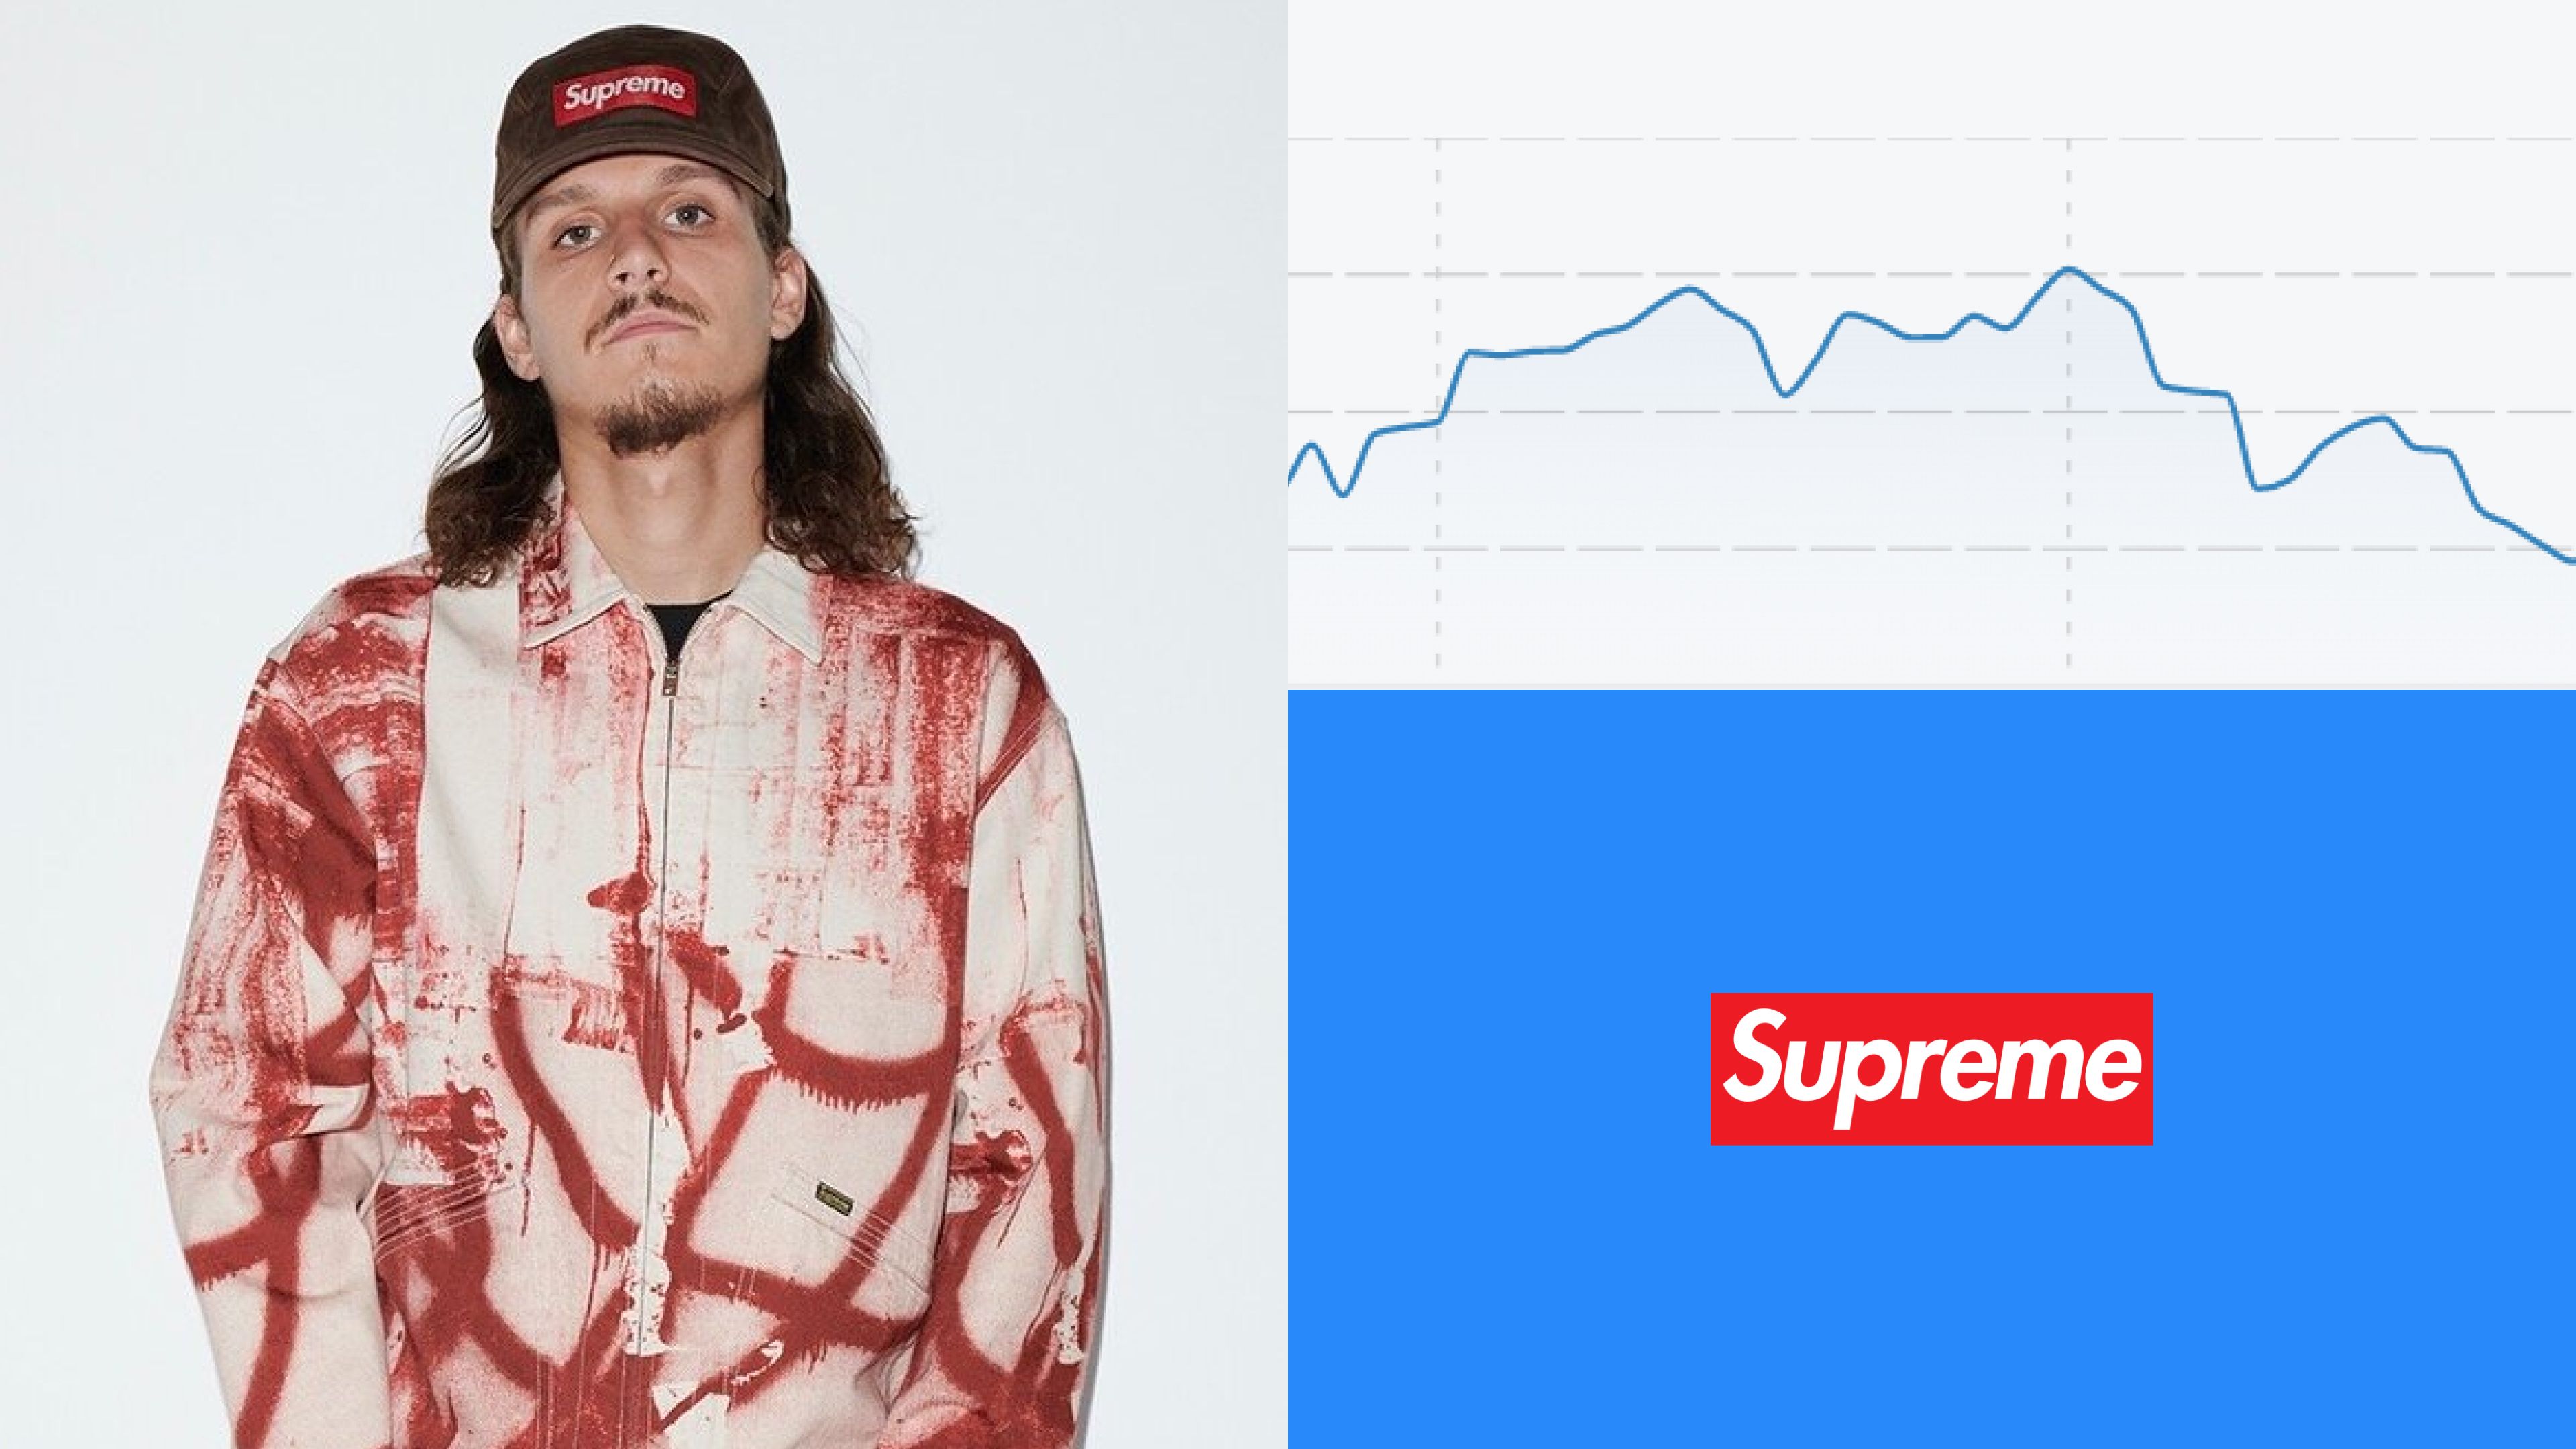 3 images: a model in supreme hat and track suit; a line graph; and the Supreme logo against a blue background